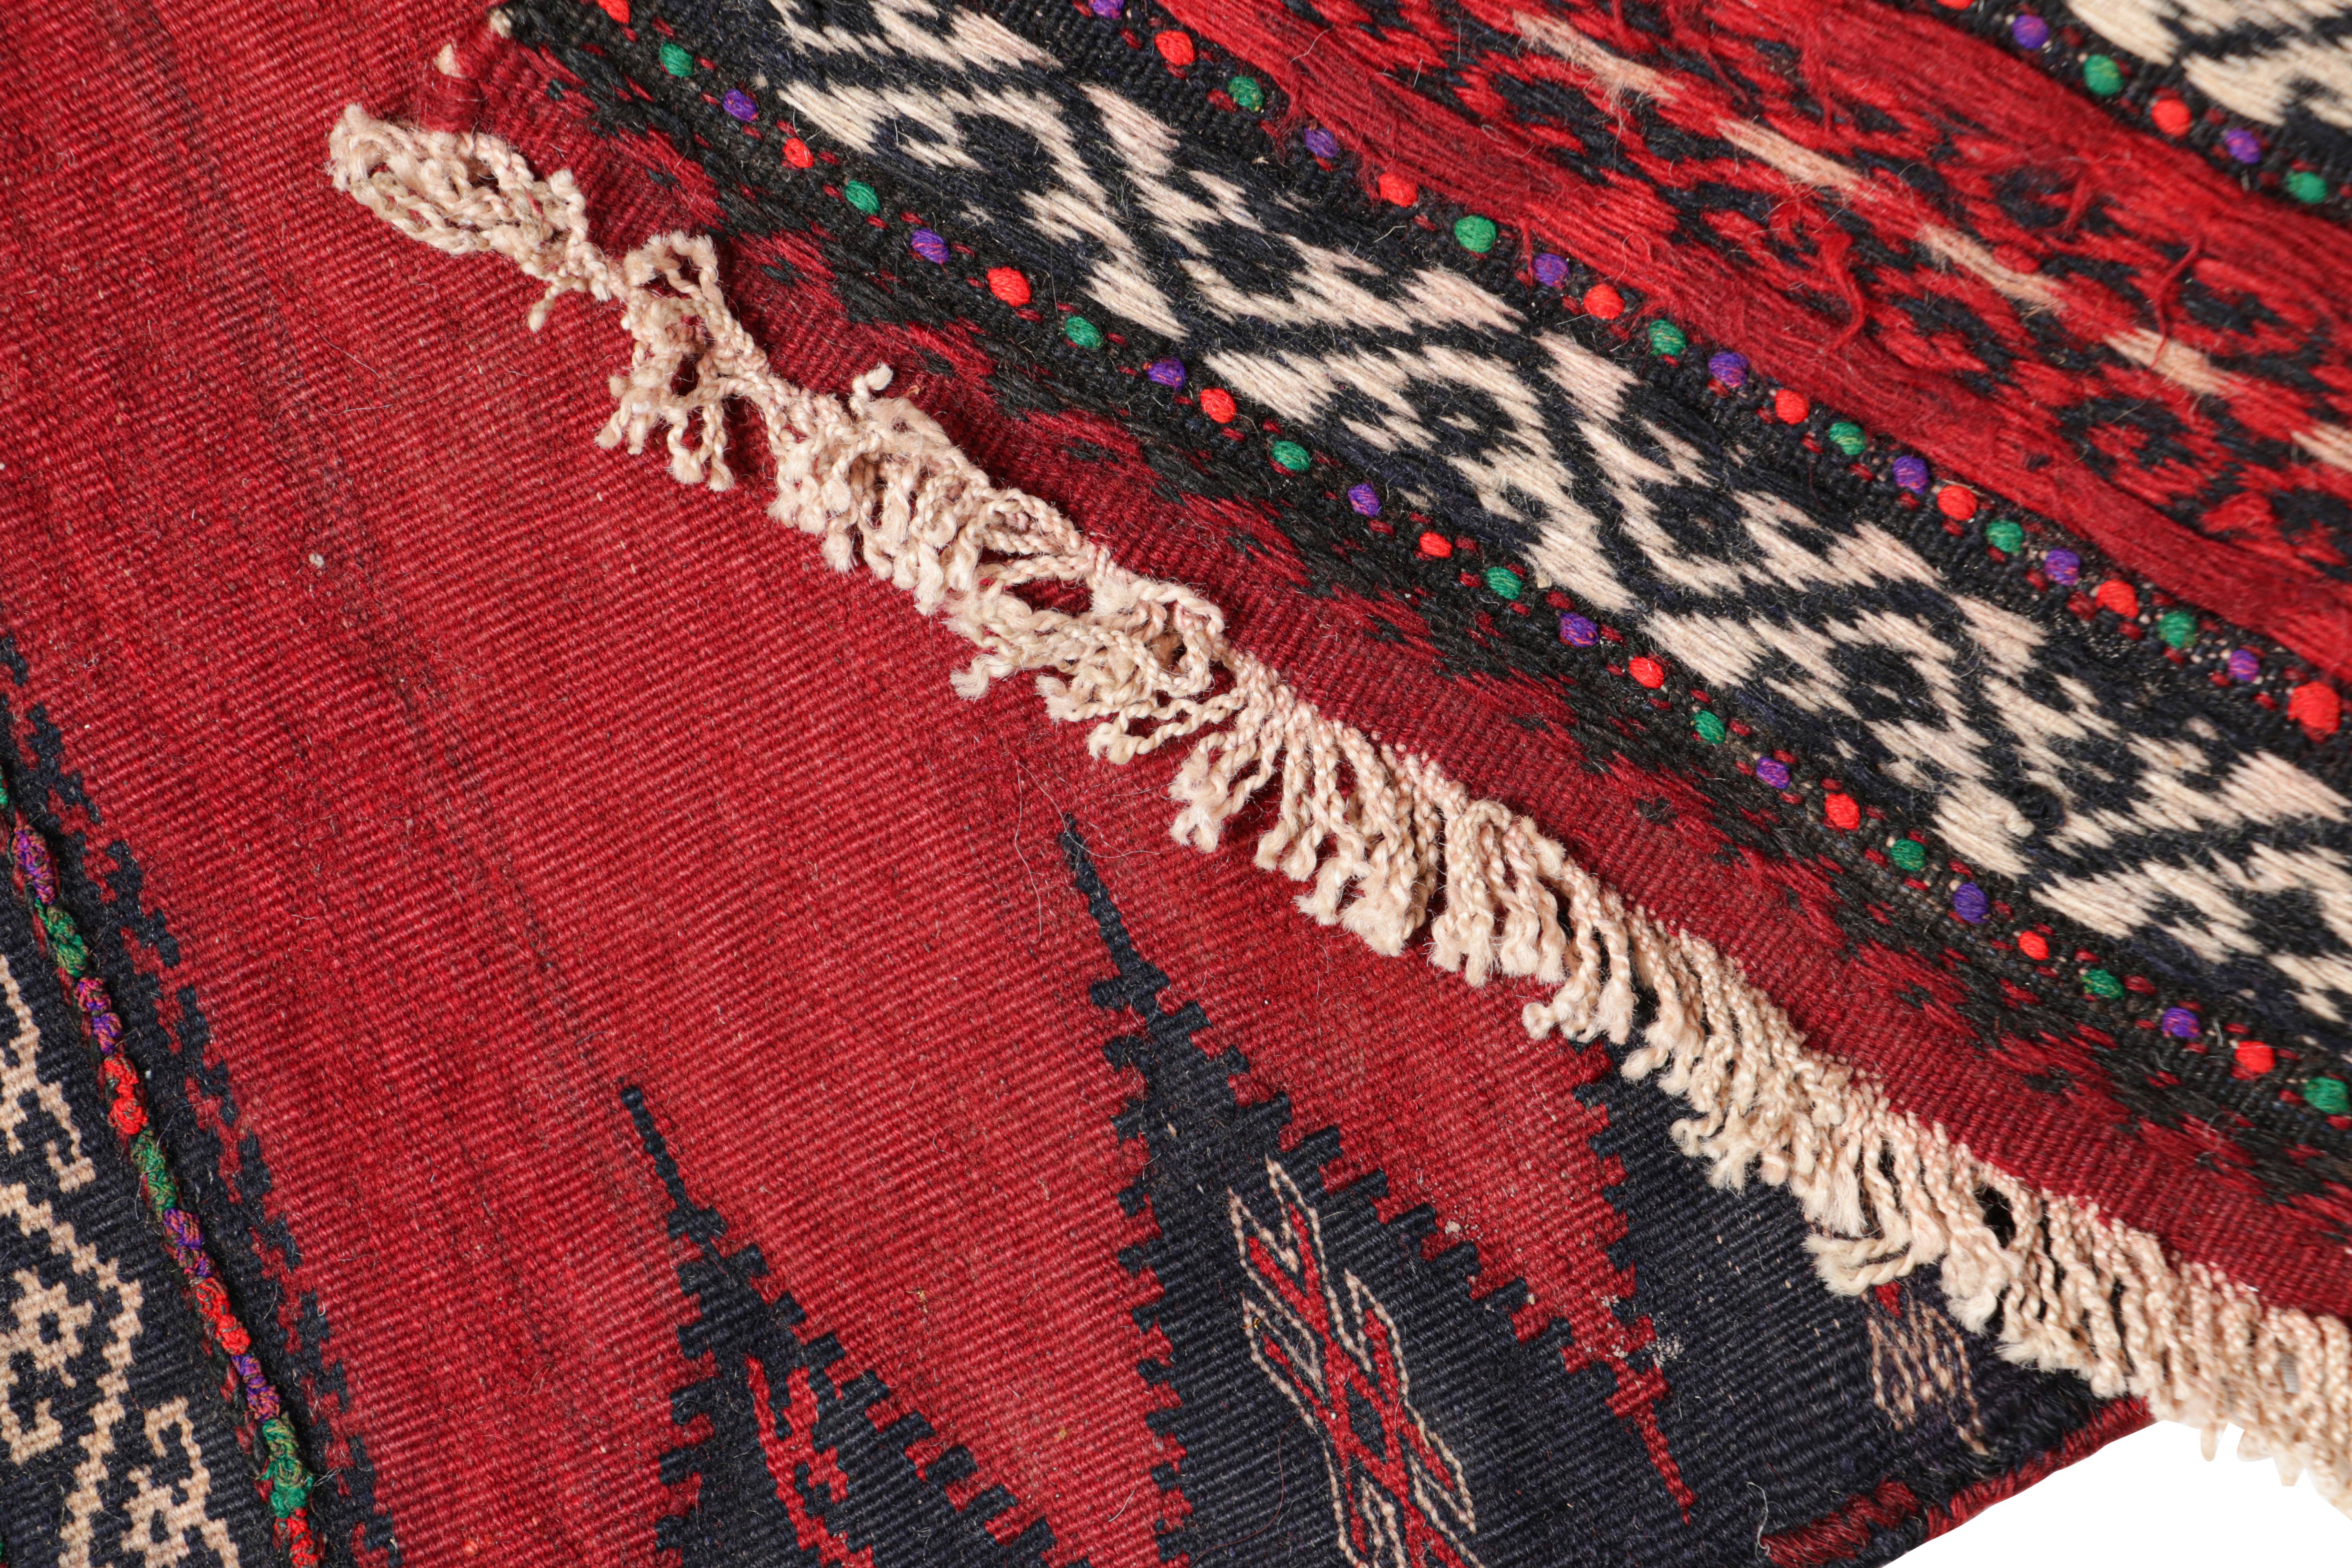 Wool Vintage Afghan Kilim in Red with Stripes & Geometric Patterns, from Rug & Kilim For Sale